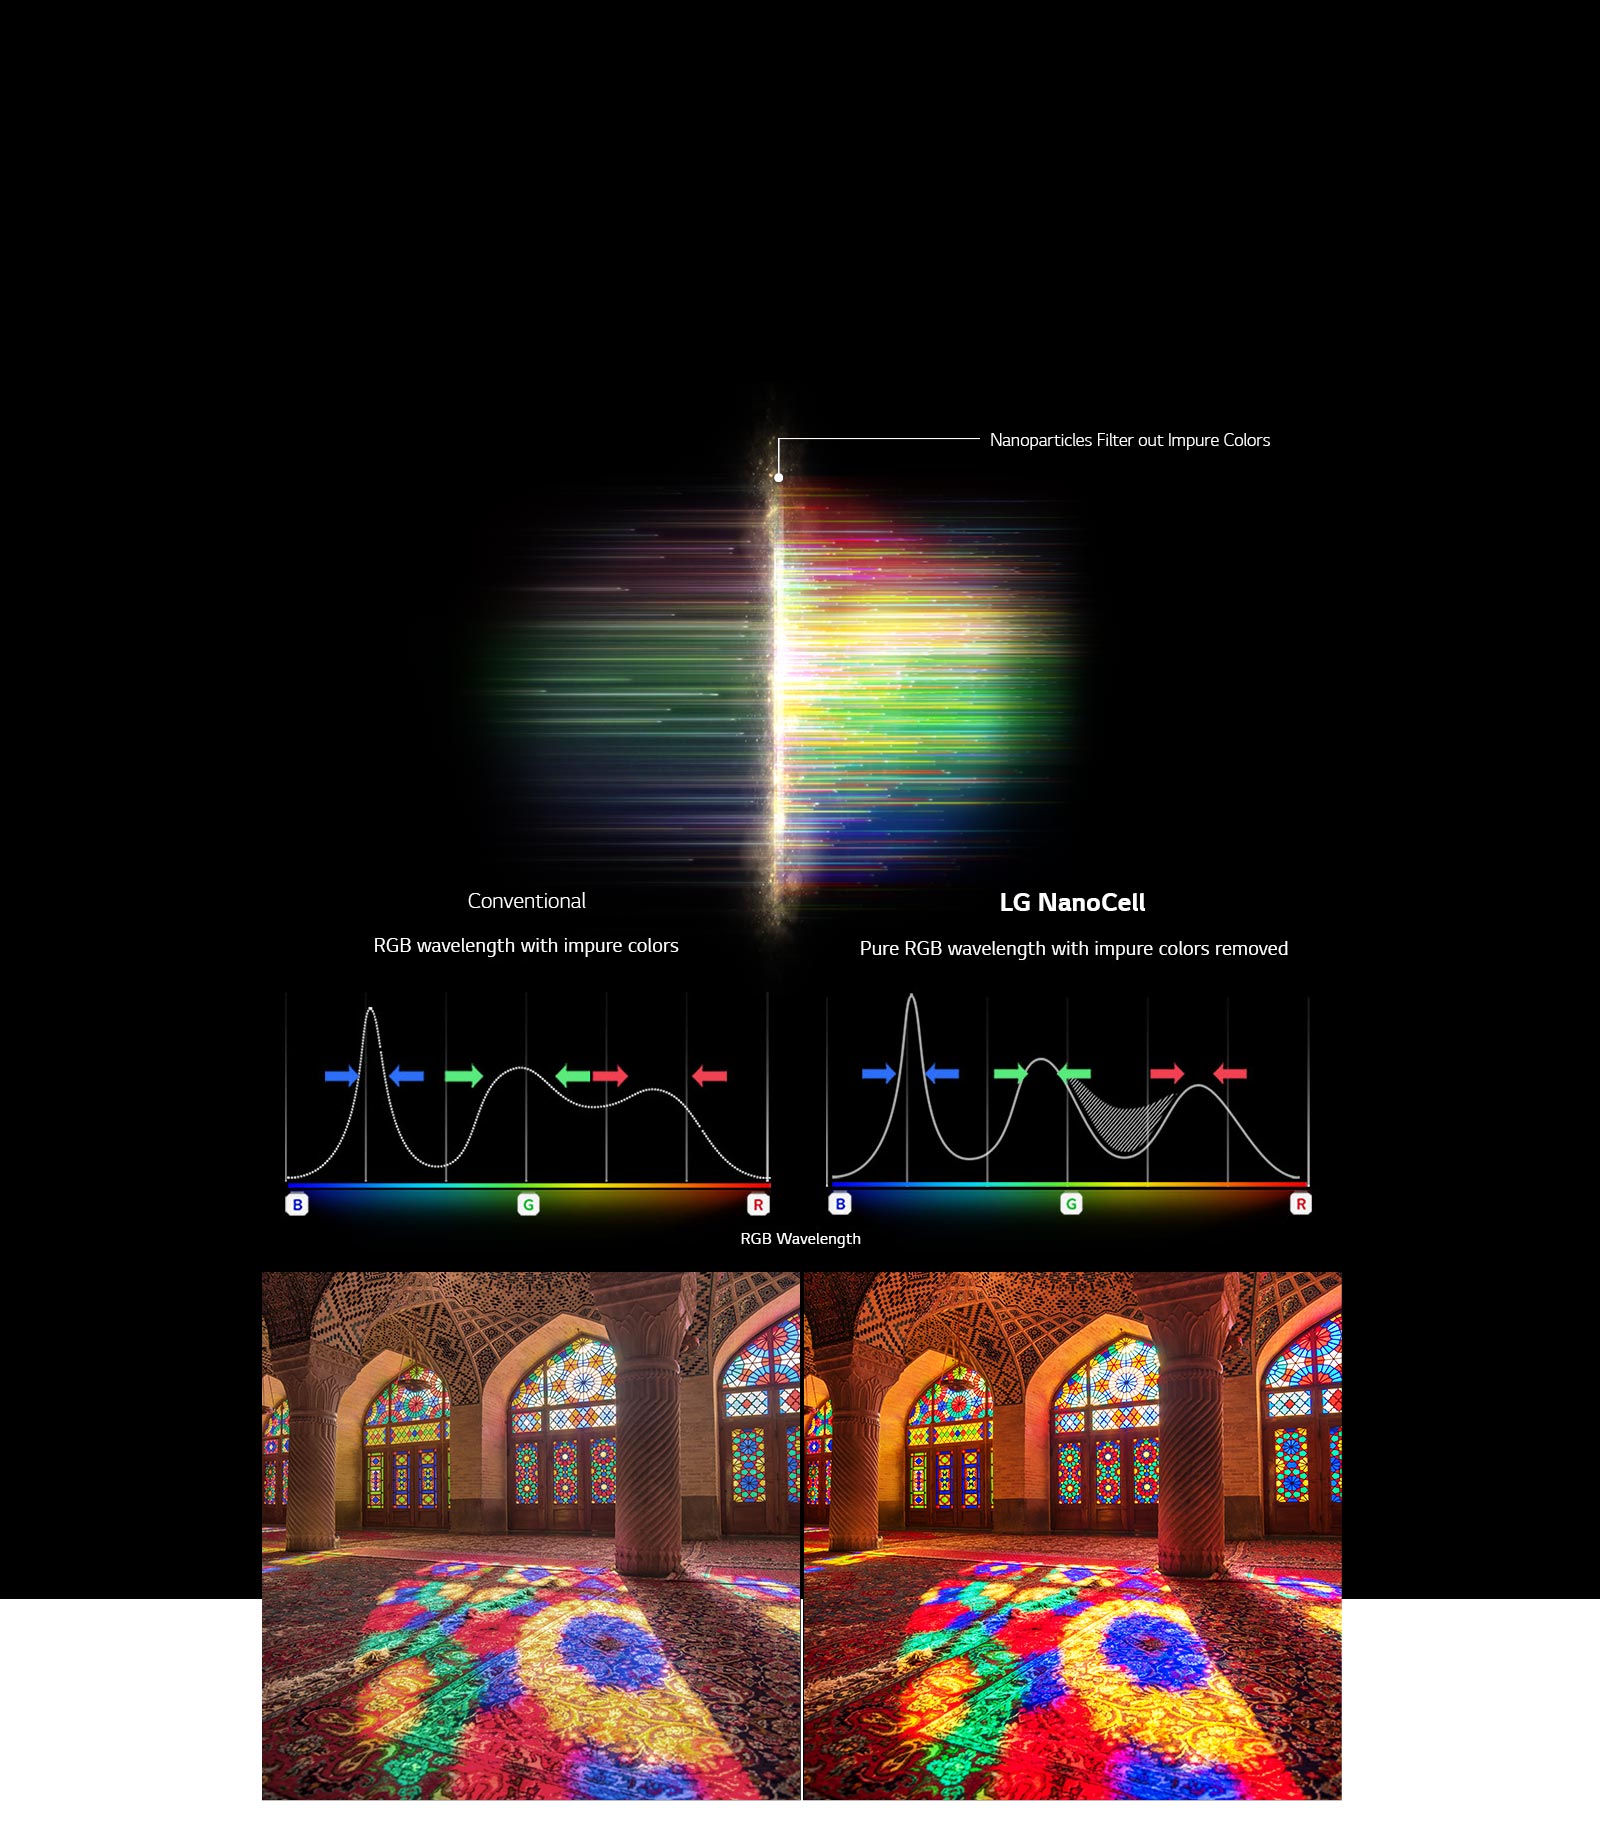 The RGB spectrum graph that showing filter out dull colors and images comparing Color Purity between Conventional and NanoCell Tech